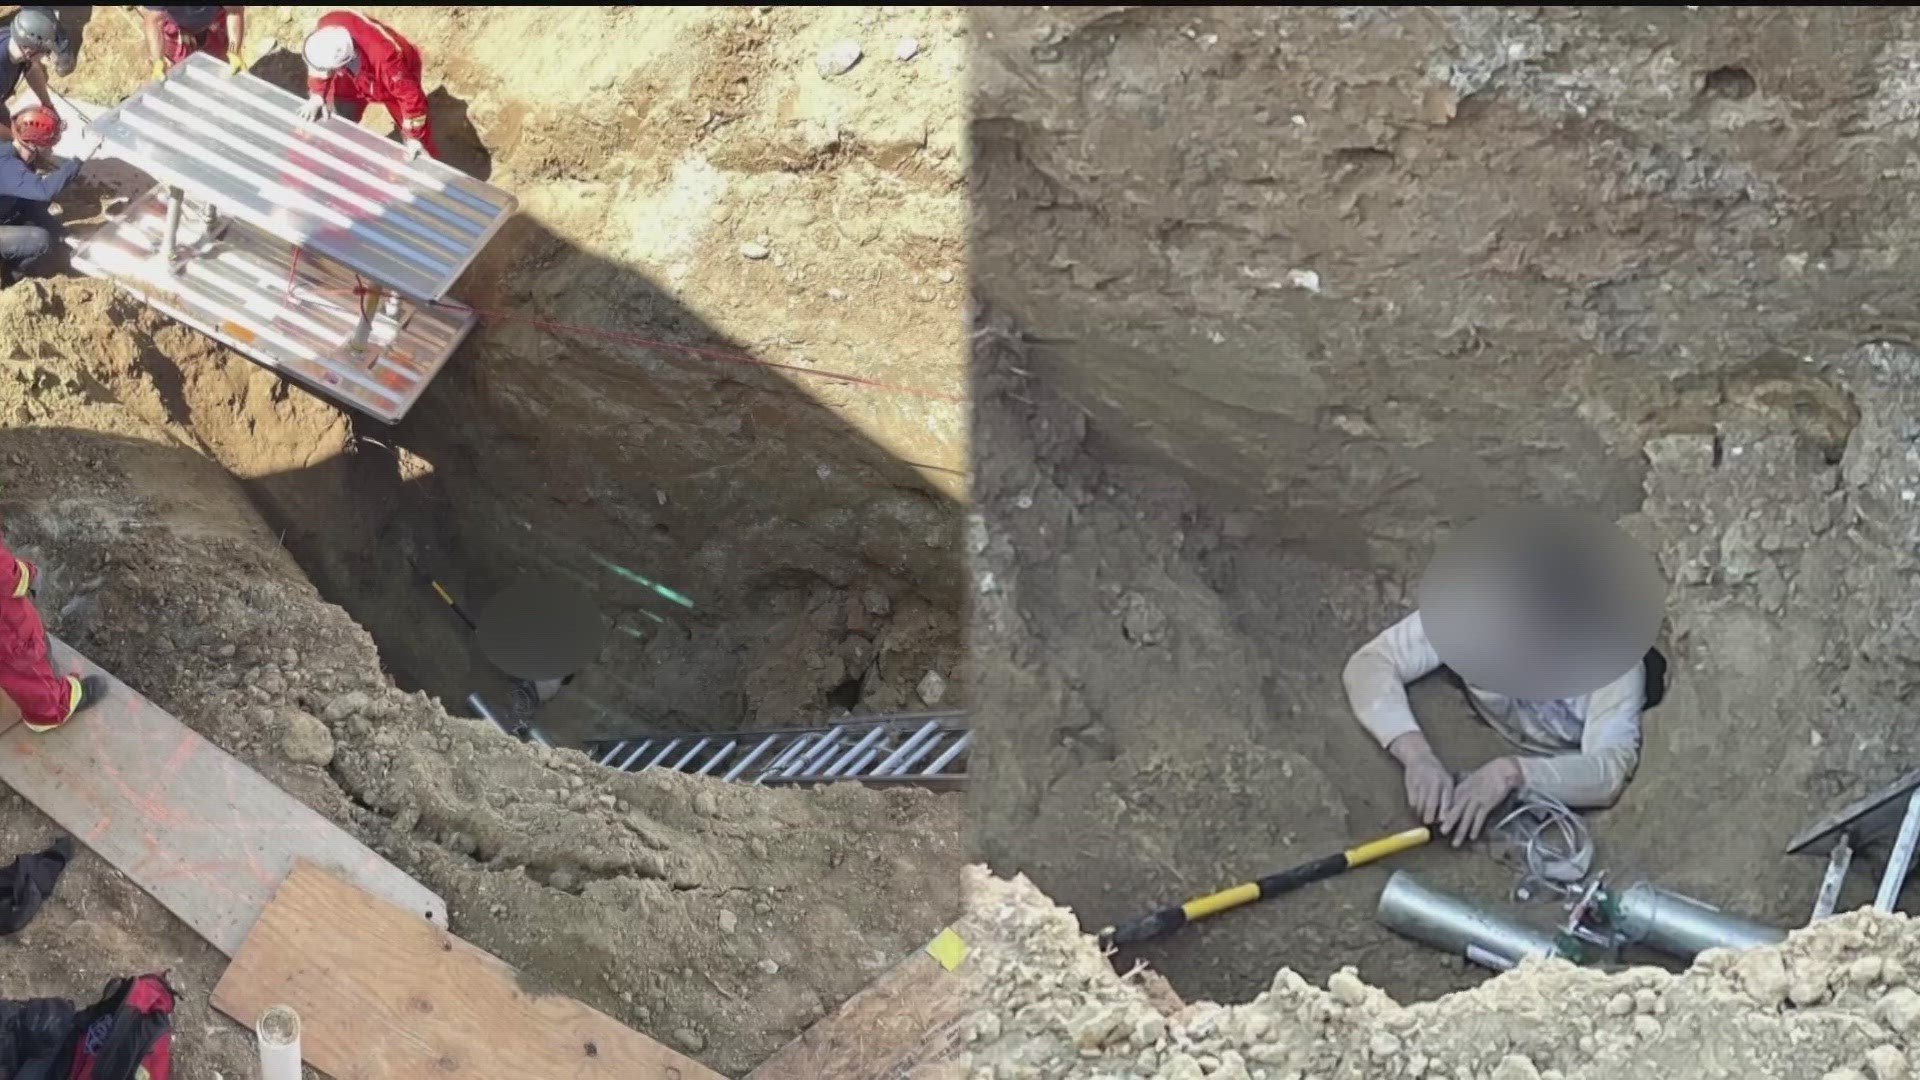 First responders rescued a construction worker who was trapped 20 to 30 feet below ground after a trench reportedly collapsed Friday.